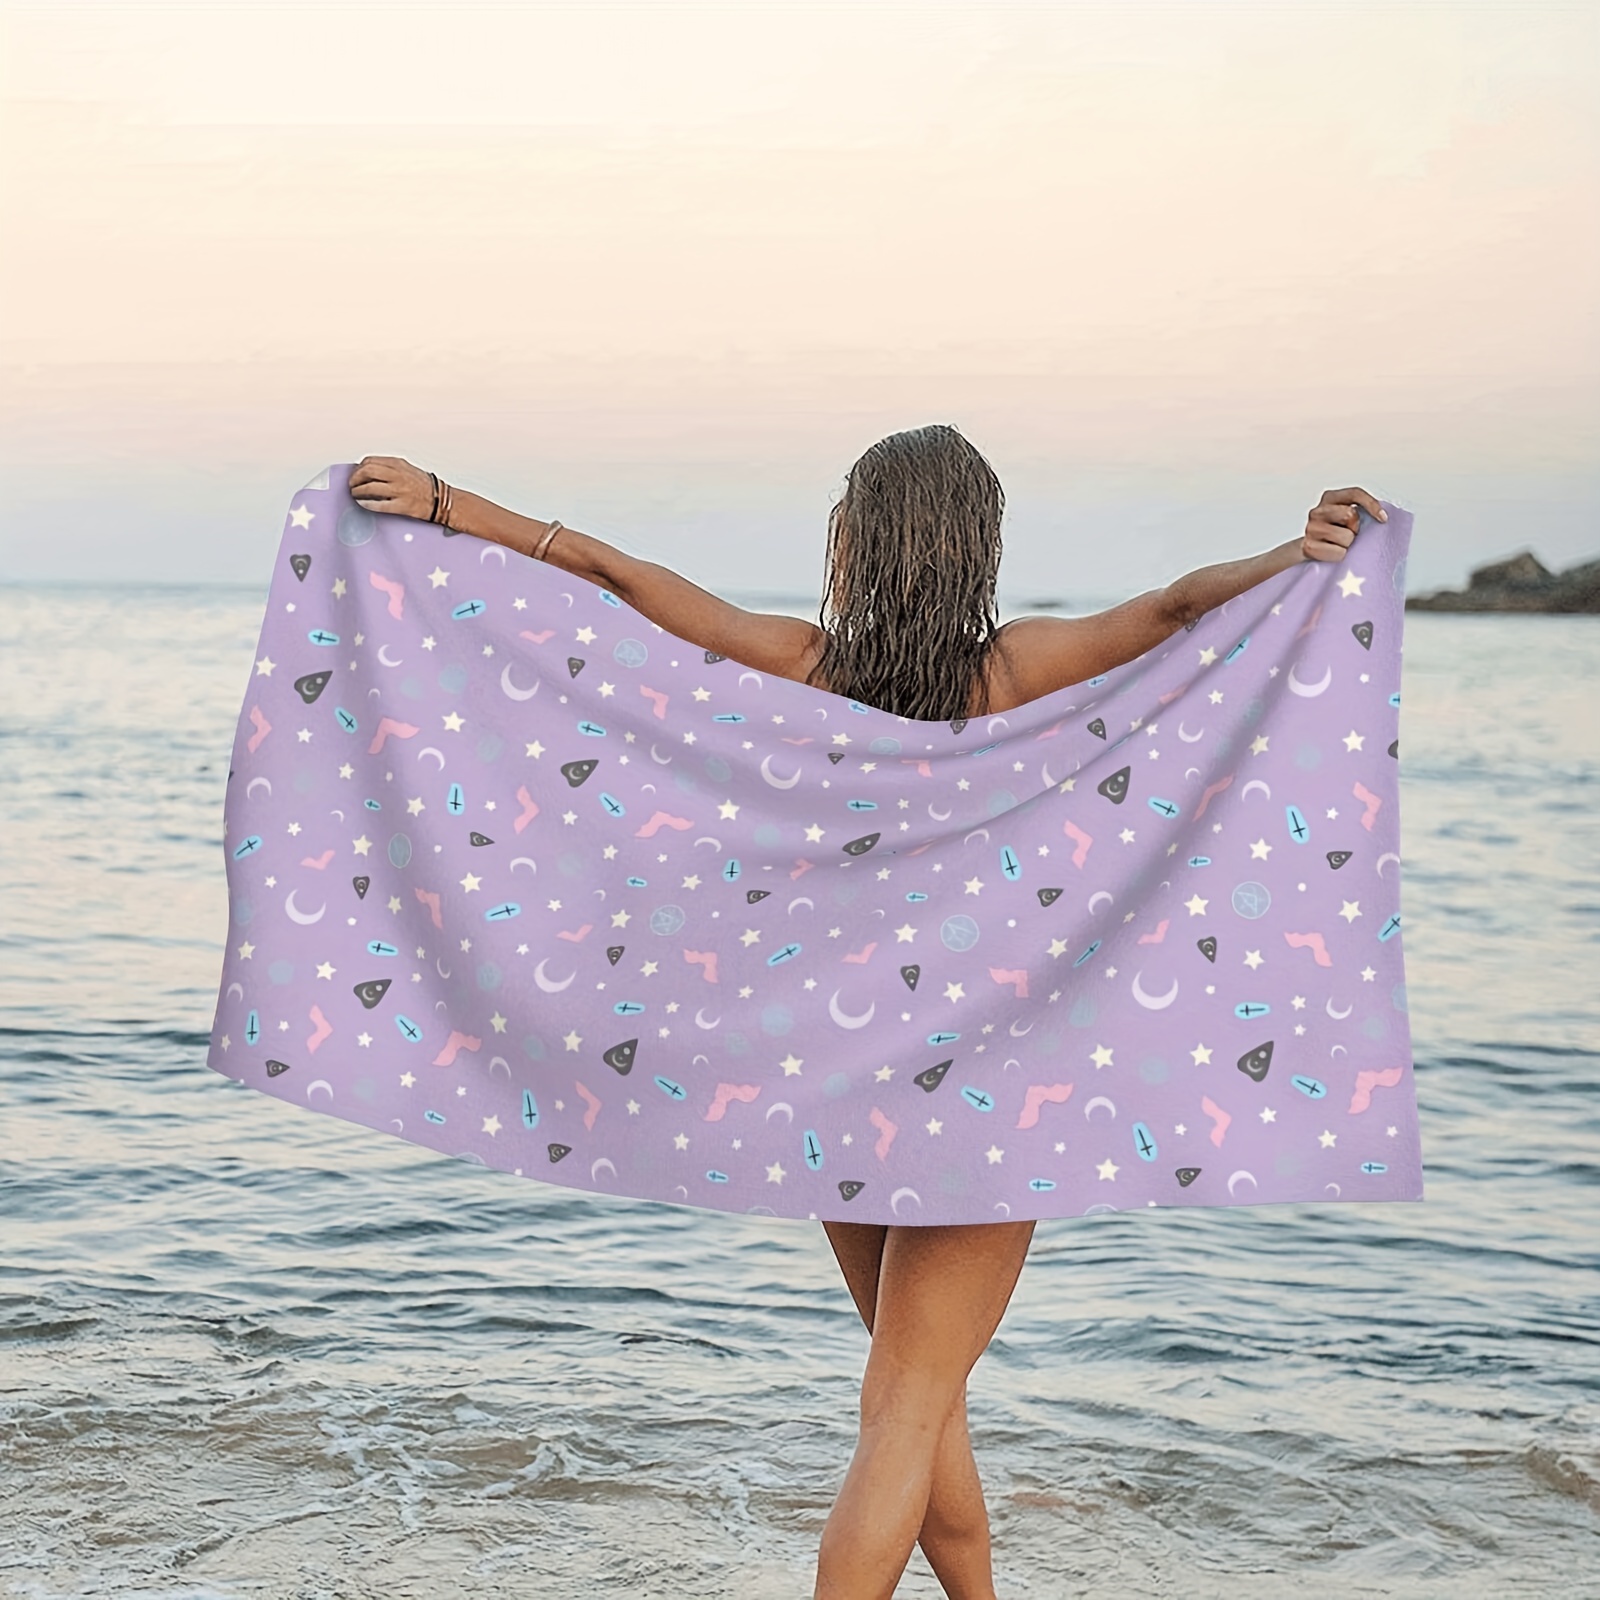 

1pc Star Moon Patterned Absorbent Beach Towel, Galaxy Patterned Quick-drying Beach Towel, Planet Patterned Beach Towel, Suitable For Beach Travel, Camping, Swimming Vacation, Beach Essential Item